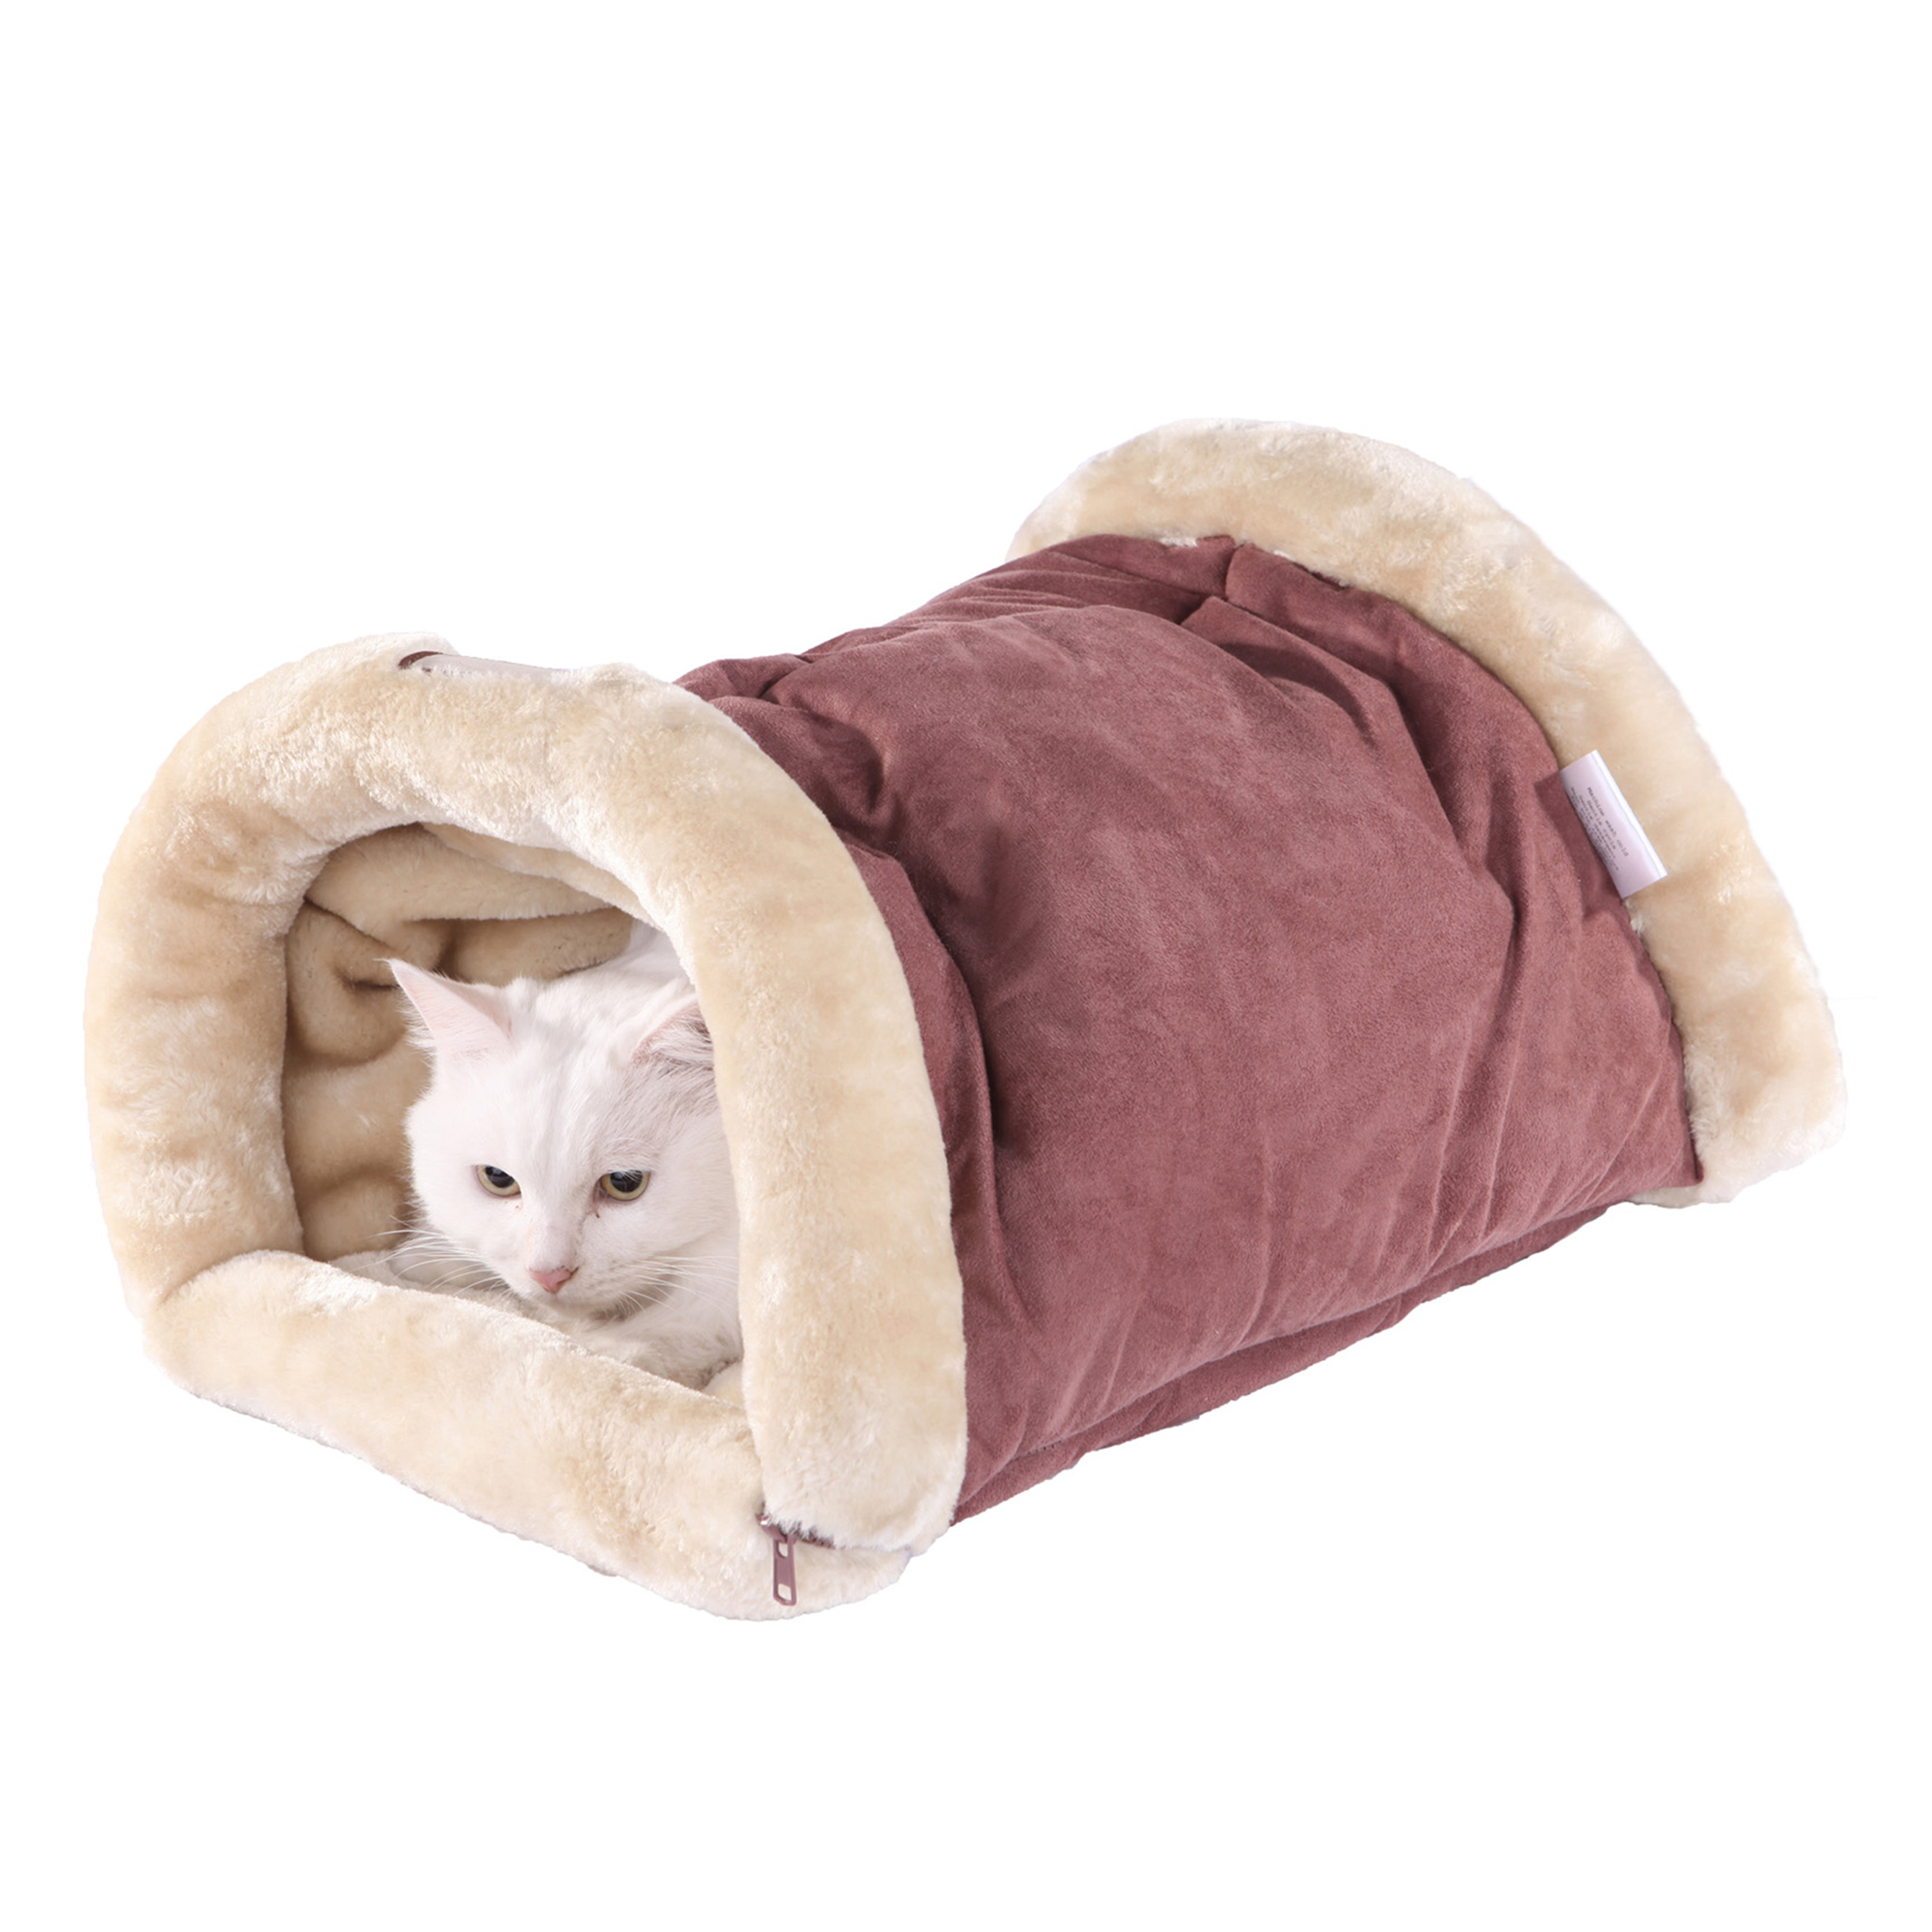 Armarkat Multiple use Cat Bed Pad, 22-Inch by 14-Inch by 10-Inch or 38-Inch by 22-Inch, C16HTH/MH - image 1 of 6